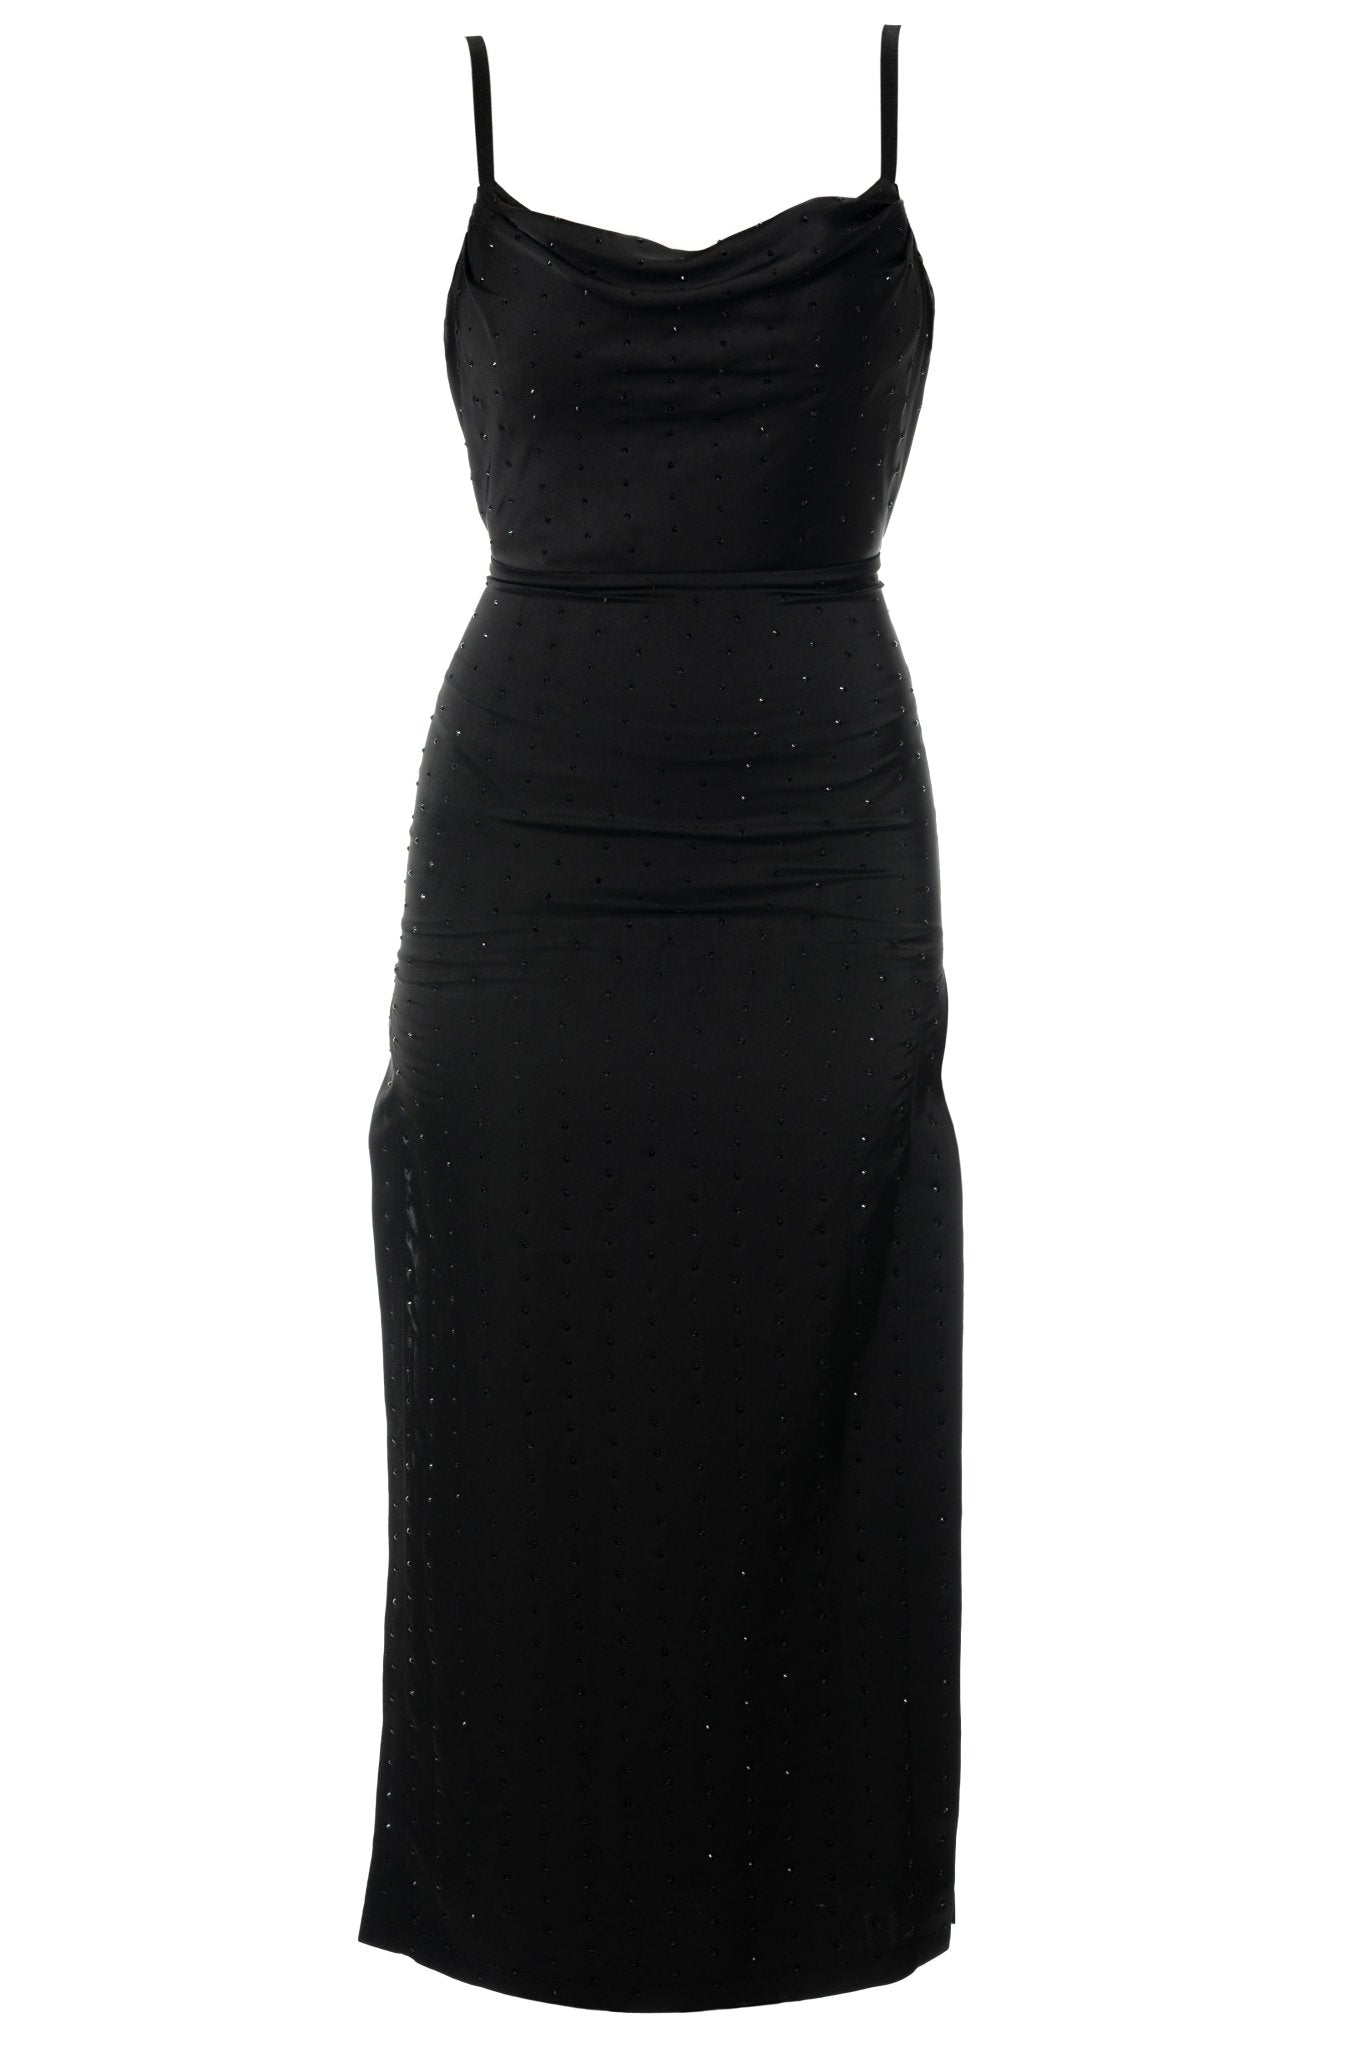 CECE Hostess Uniform Dress for gaming, casino, hospitality, hotel, restaurant, and resorts. Black satin with stones and a cowl neckline and open back. Ankle length with side slits. Hostess Uniform - KAPTVA Apparel